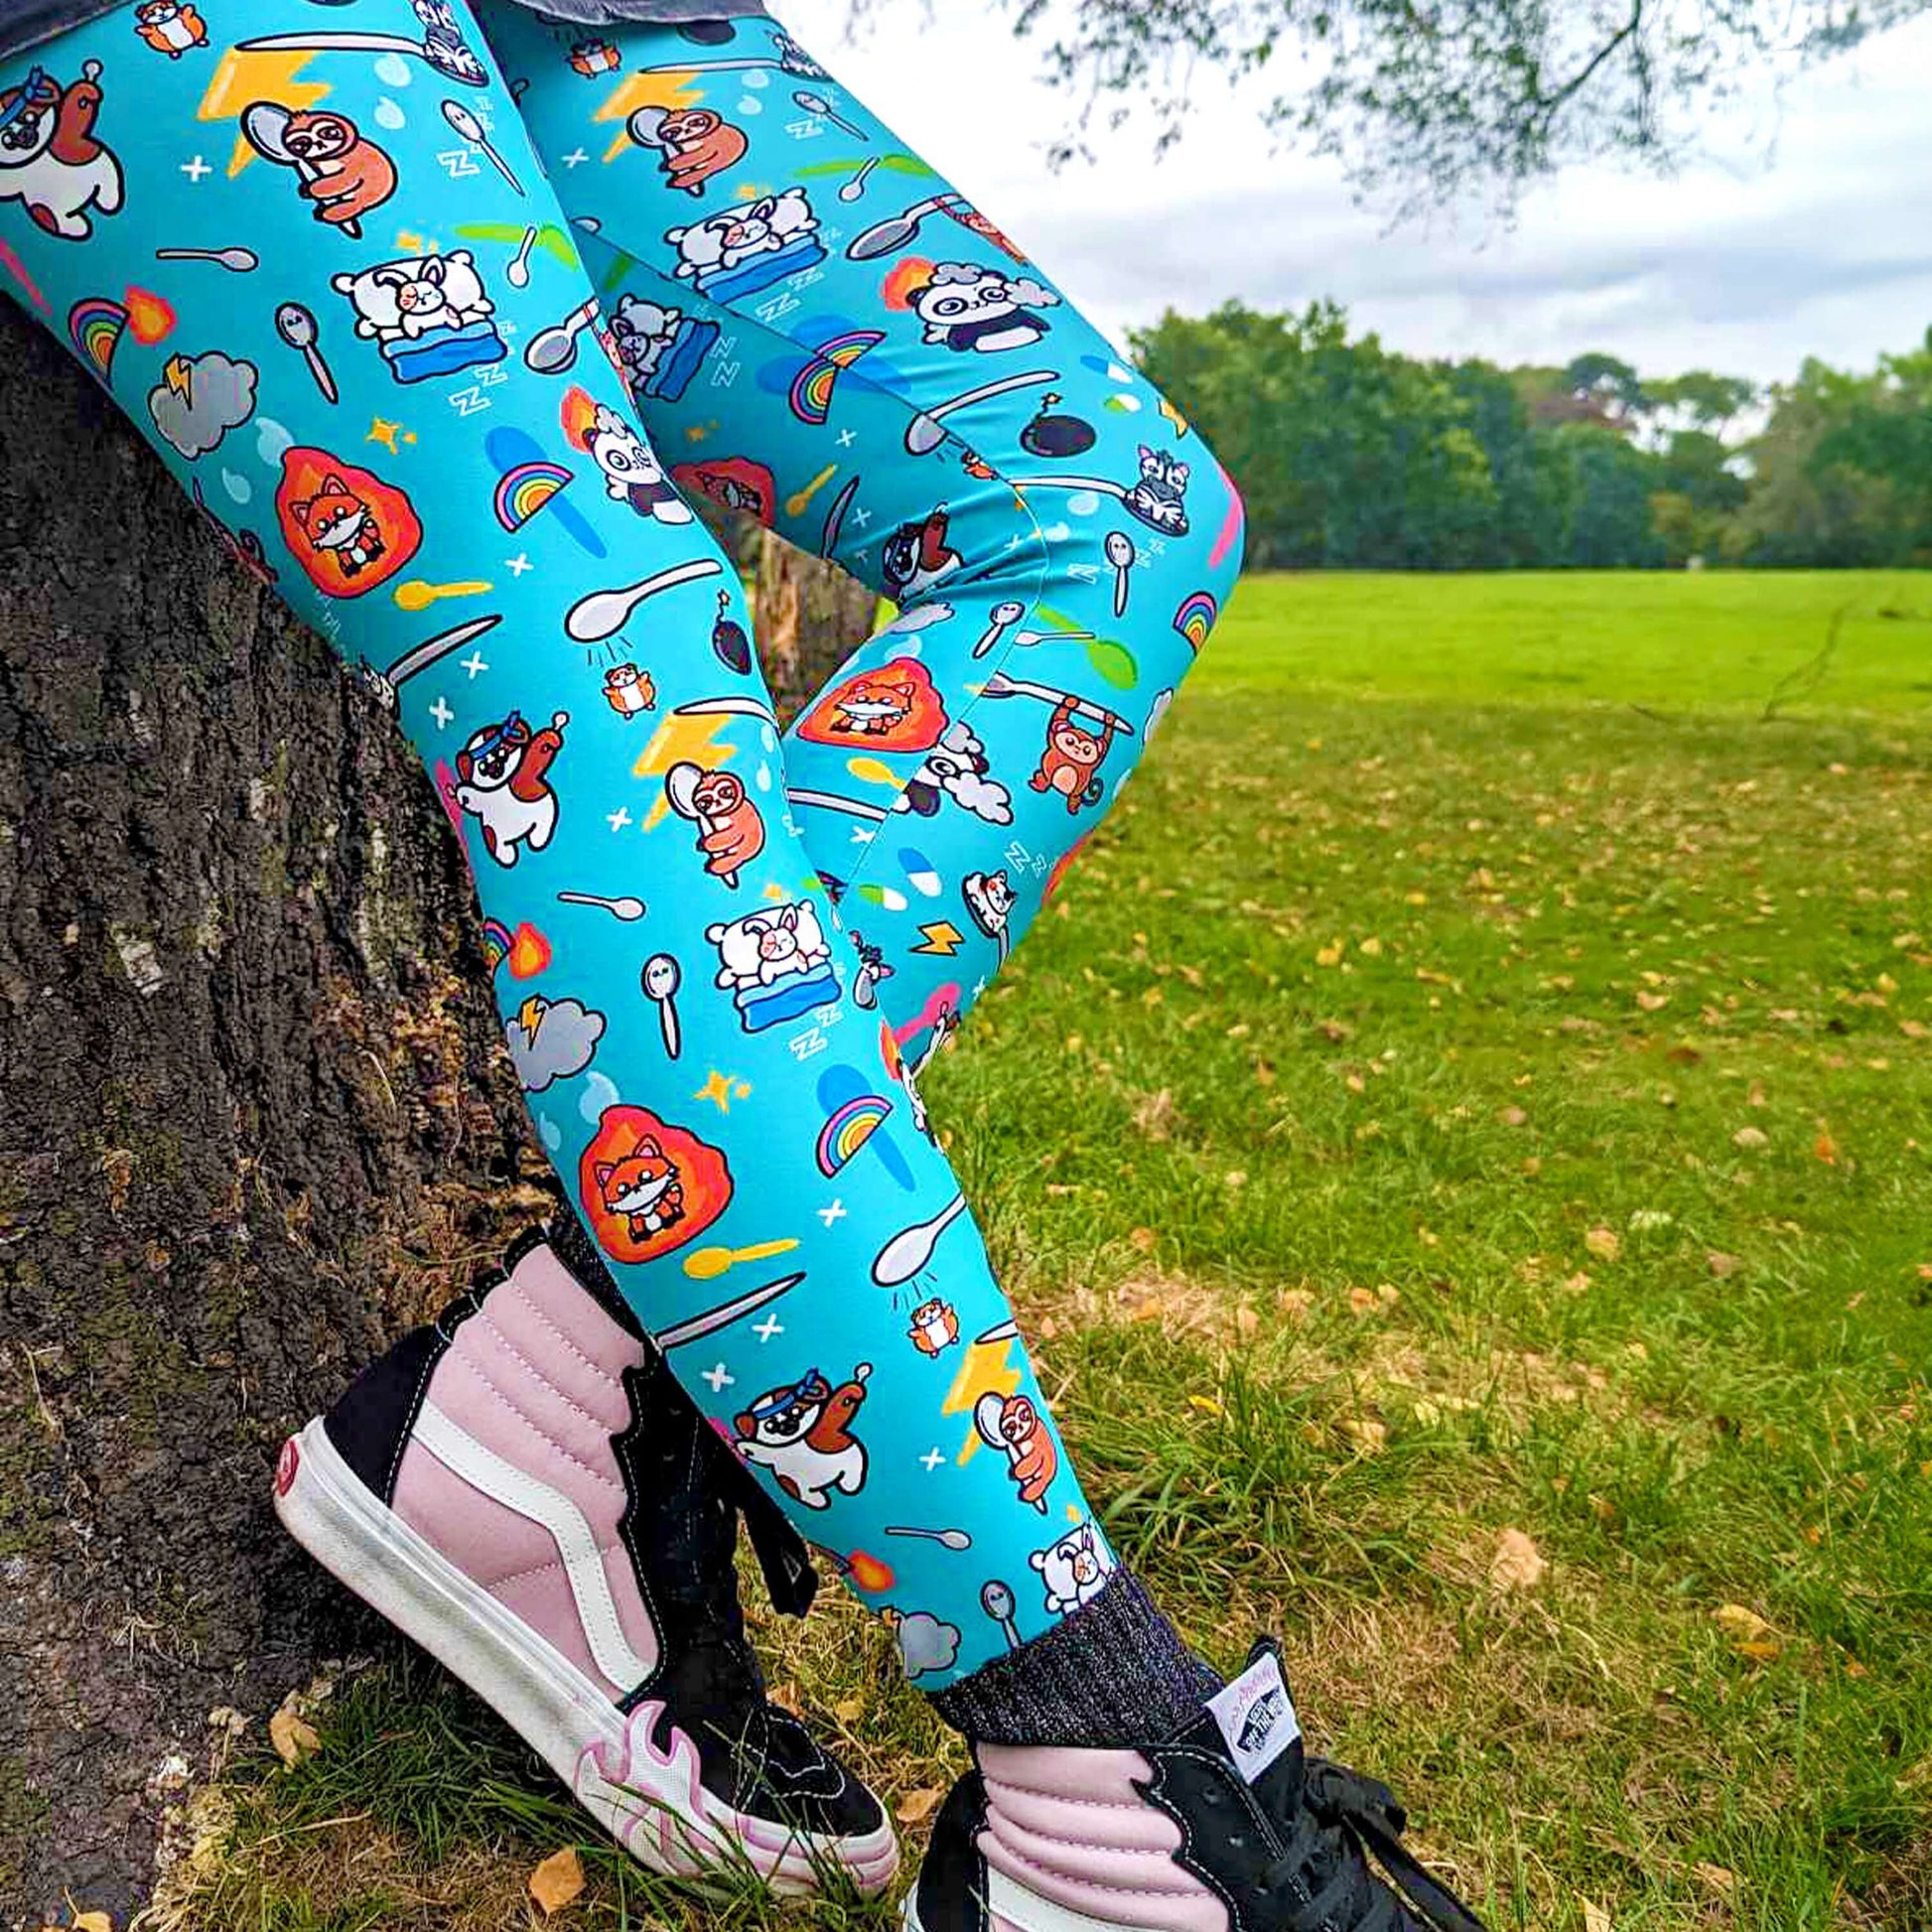 The Spoonie Leggings modelled by Nikky outside in a forest area. She is leaning back on a tree stump wearing the spoonie leggings with pin and black vans trainers. The blue leggings feature various invisible illness themed animals, rainbows, spoons, sparkles, flames, pills and lightning bolts. Raising awareness for hidden disabilities.